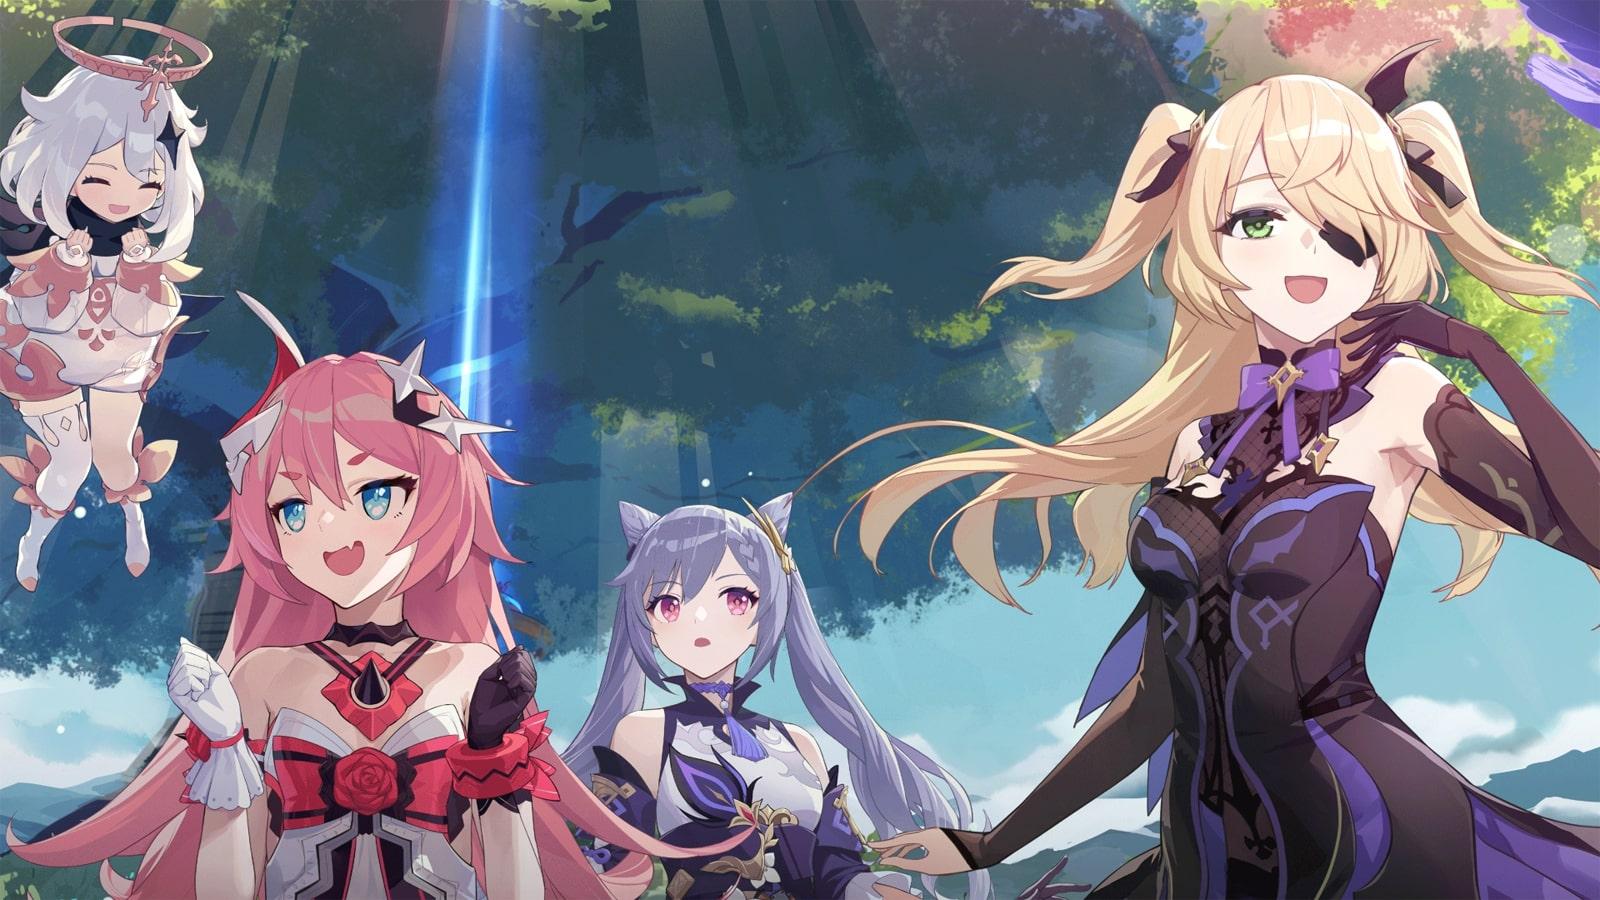 Genshin Impact's Fischl and Keqing in Honkai Impact 3rd crossover